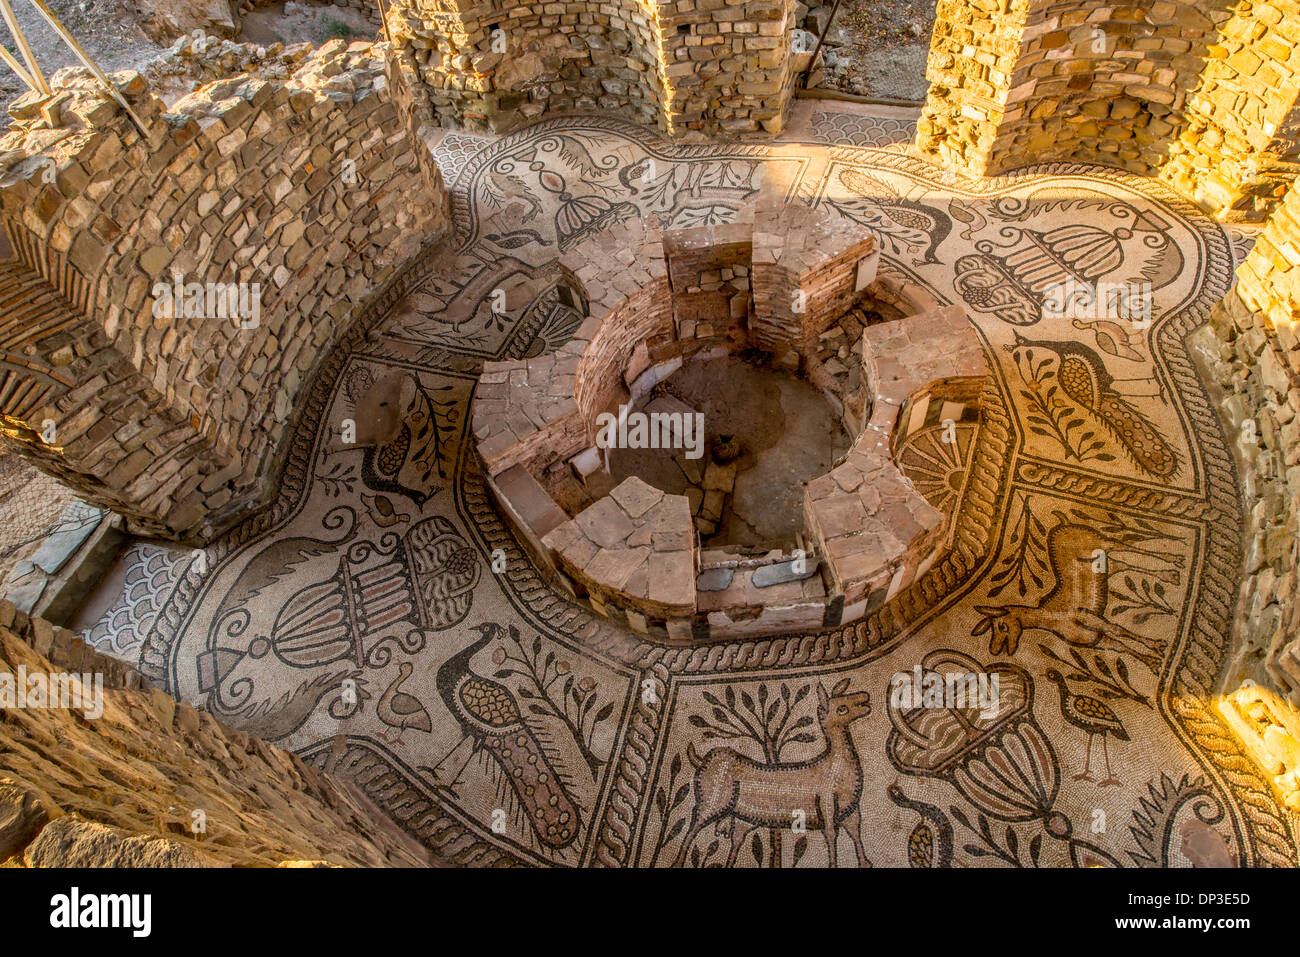 Mosaics in the Baptistereum at Stobi, Ancient Roman city in Macedonia, remains of Christian building period Stock Photo